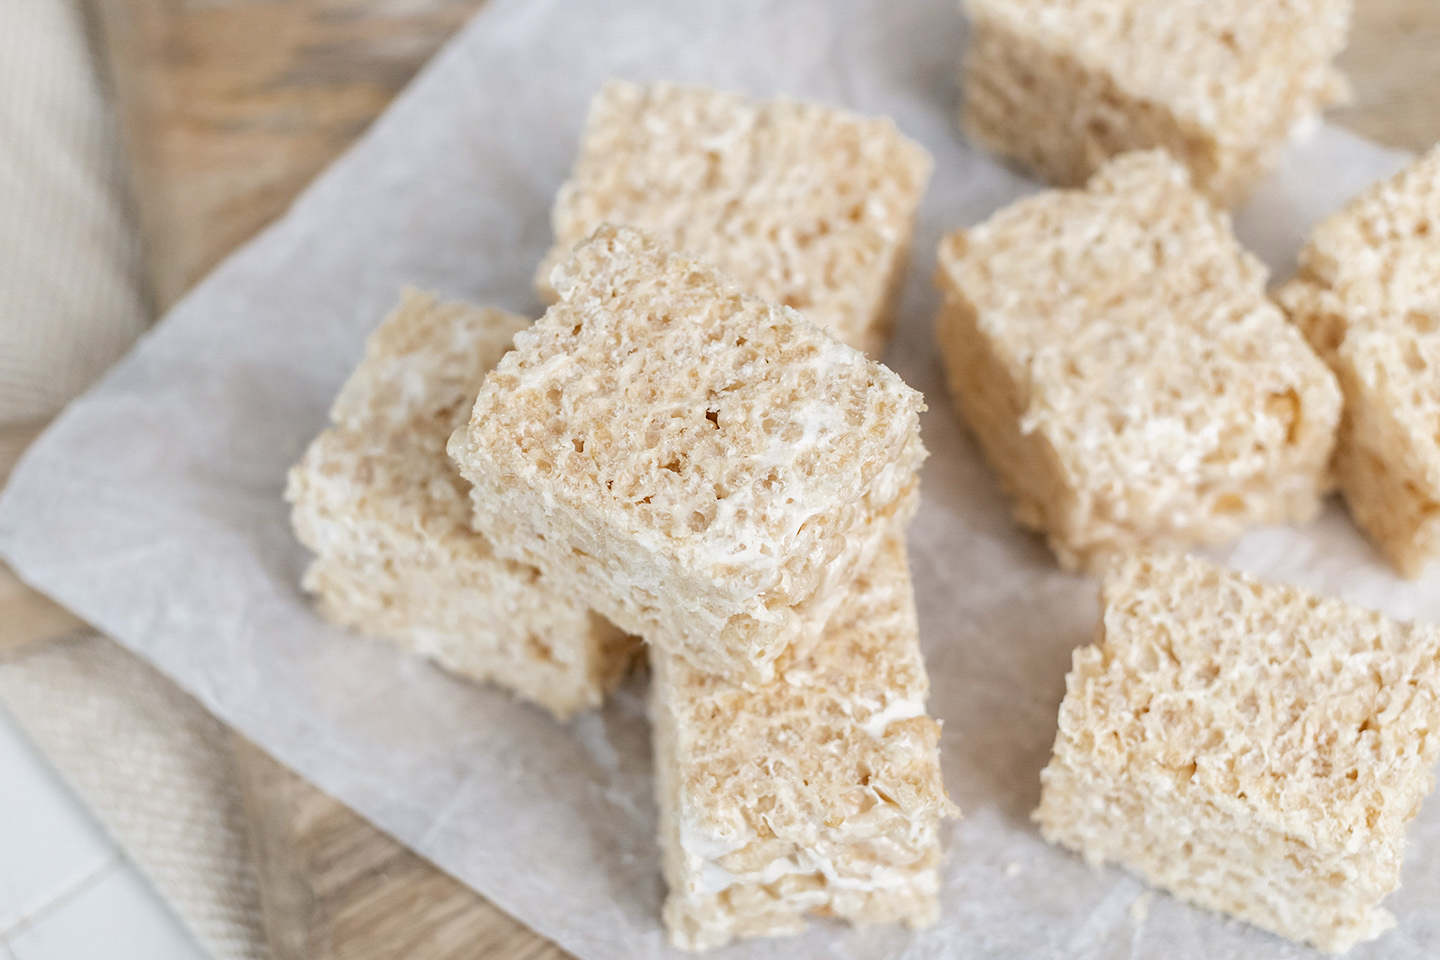 These crispy rice treats are just exactly like the classic ones you remember from when you were a kid. Here's how to make plant-based Rice Krispie treats!